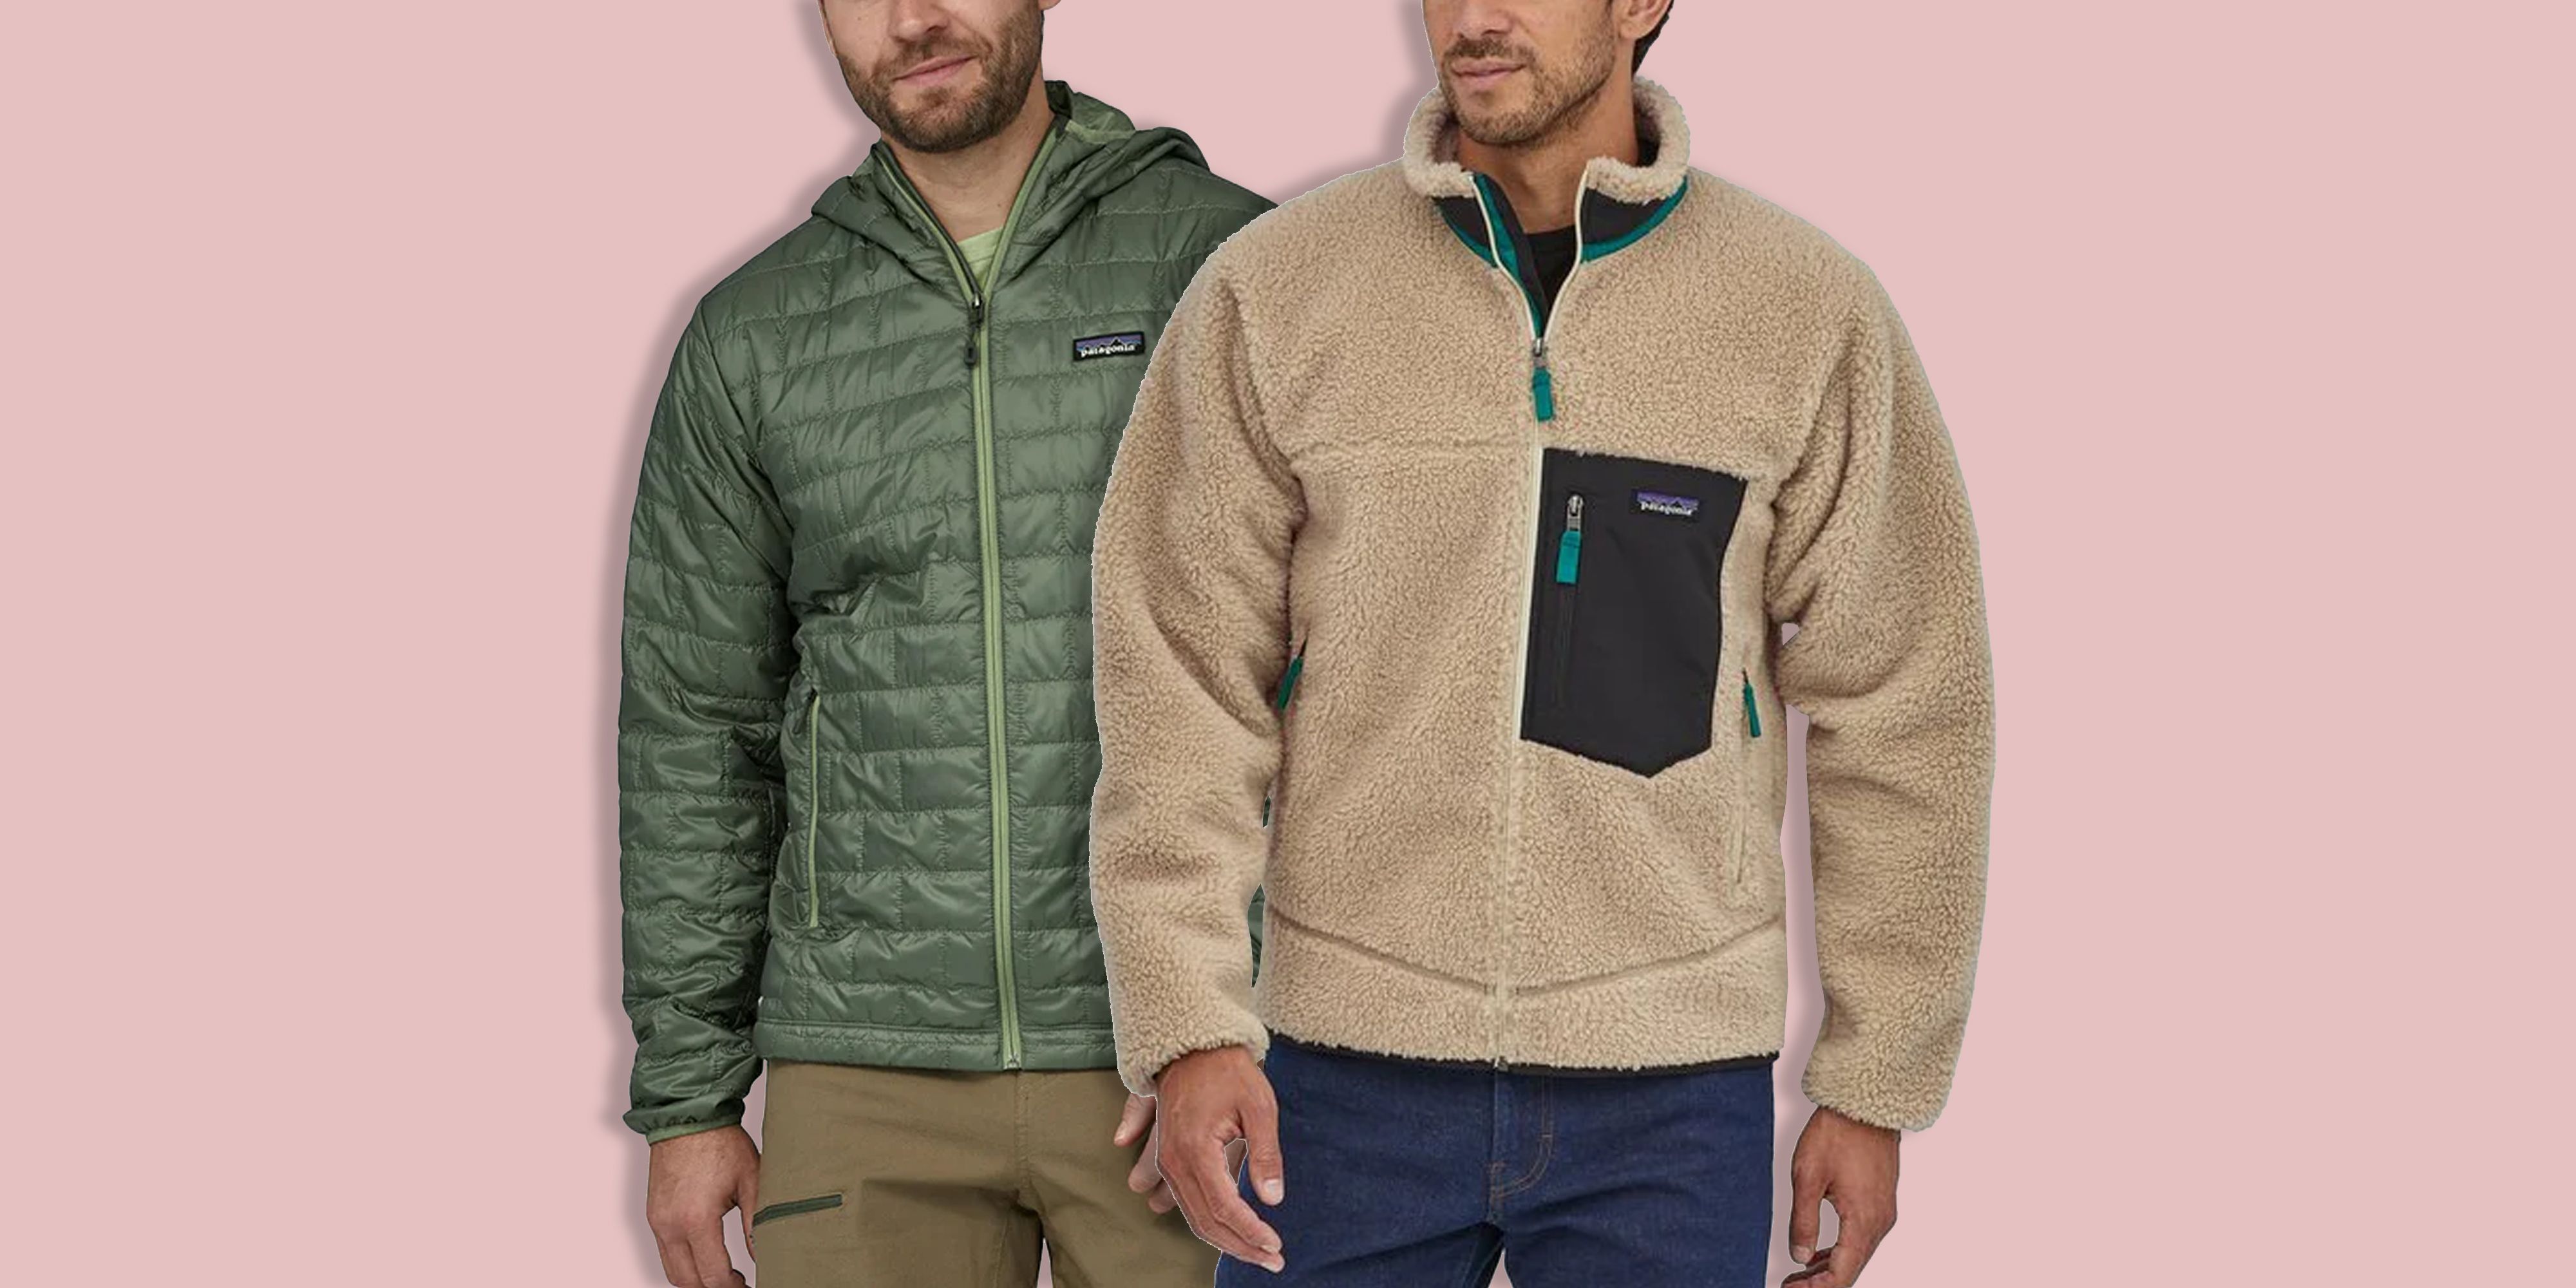 Can't Miss, No Fail Patagonia Must Haves